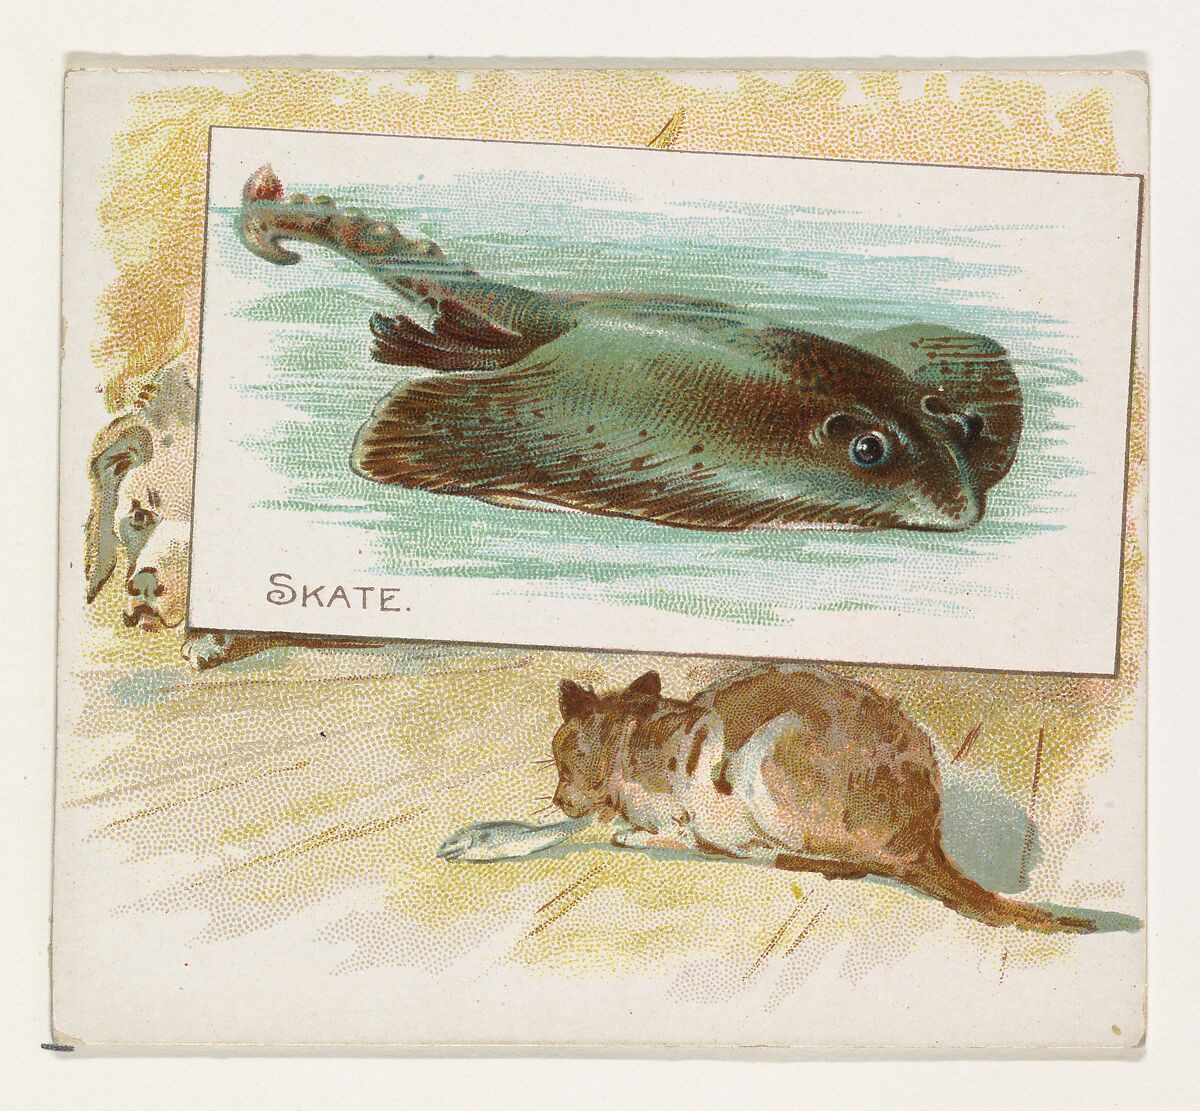 Skate, from Fish from American Waters series (N39) for Allen & Ginter Cigarettes, Issued by Allen &amp; Ginter (American, Richmond, Virginia), Commercial color lithograph 